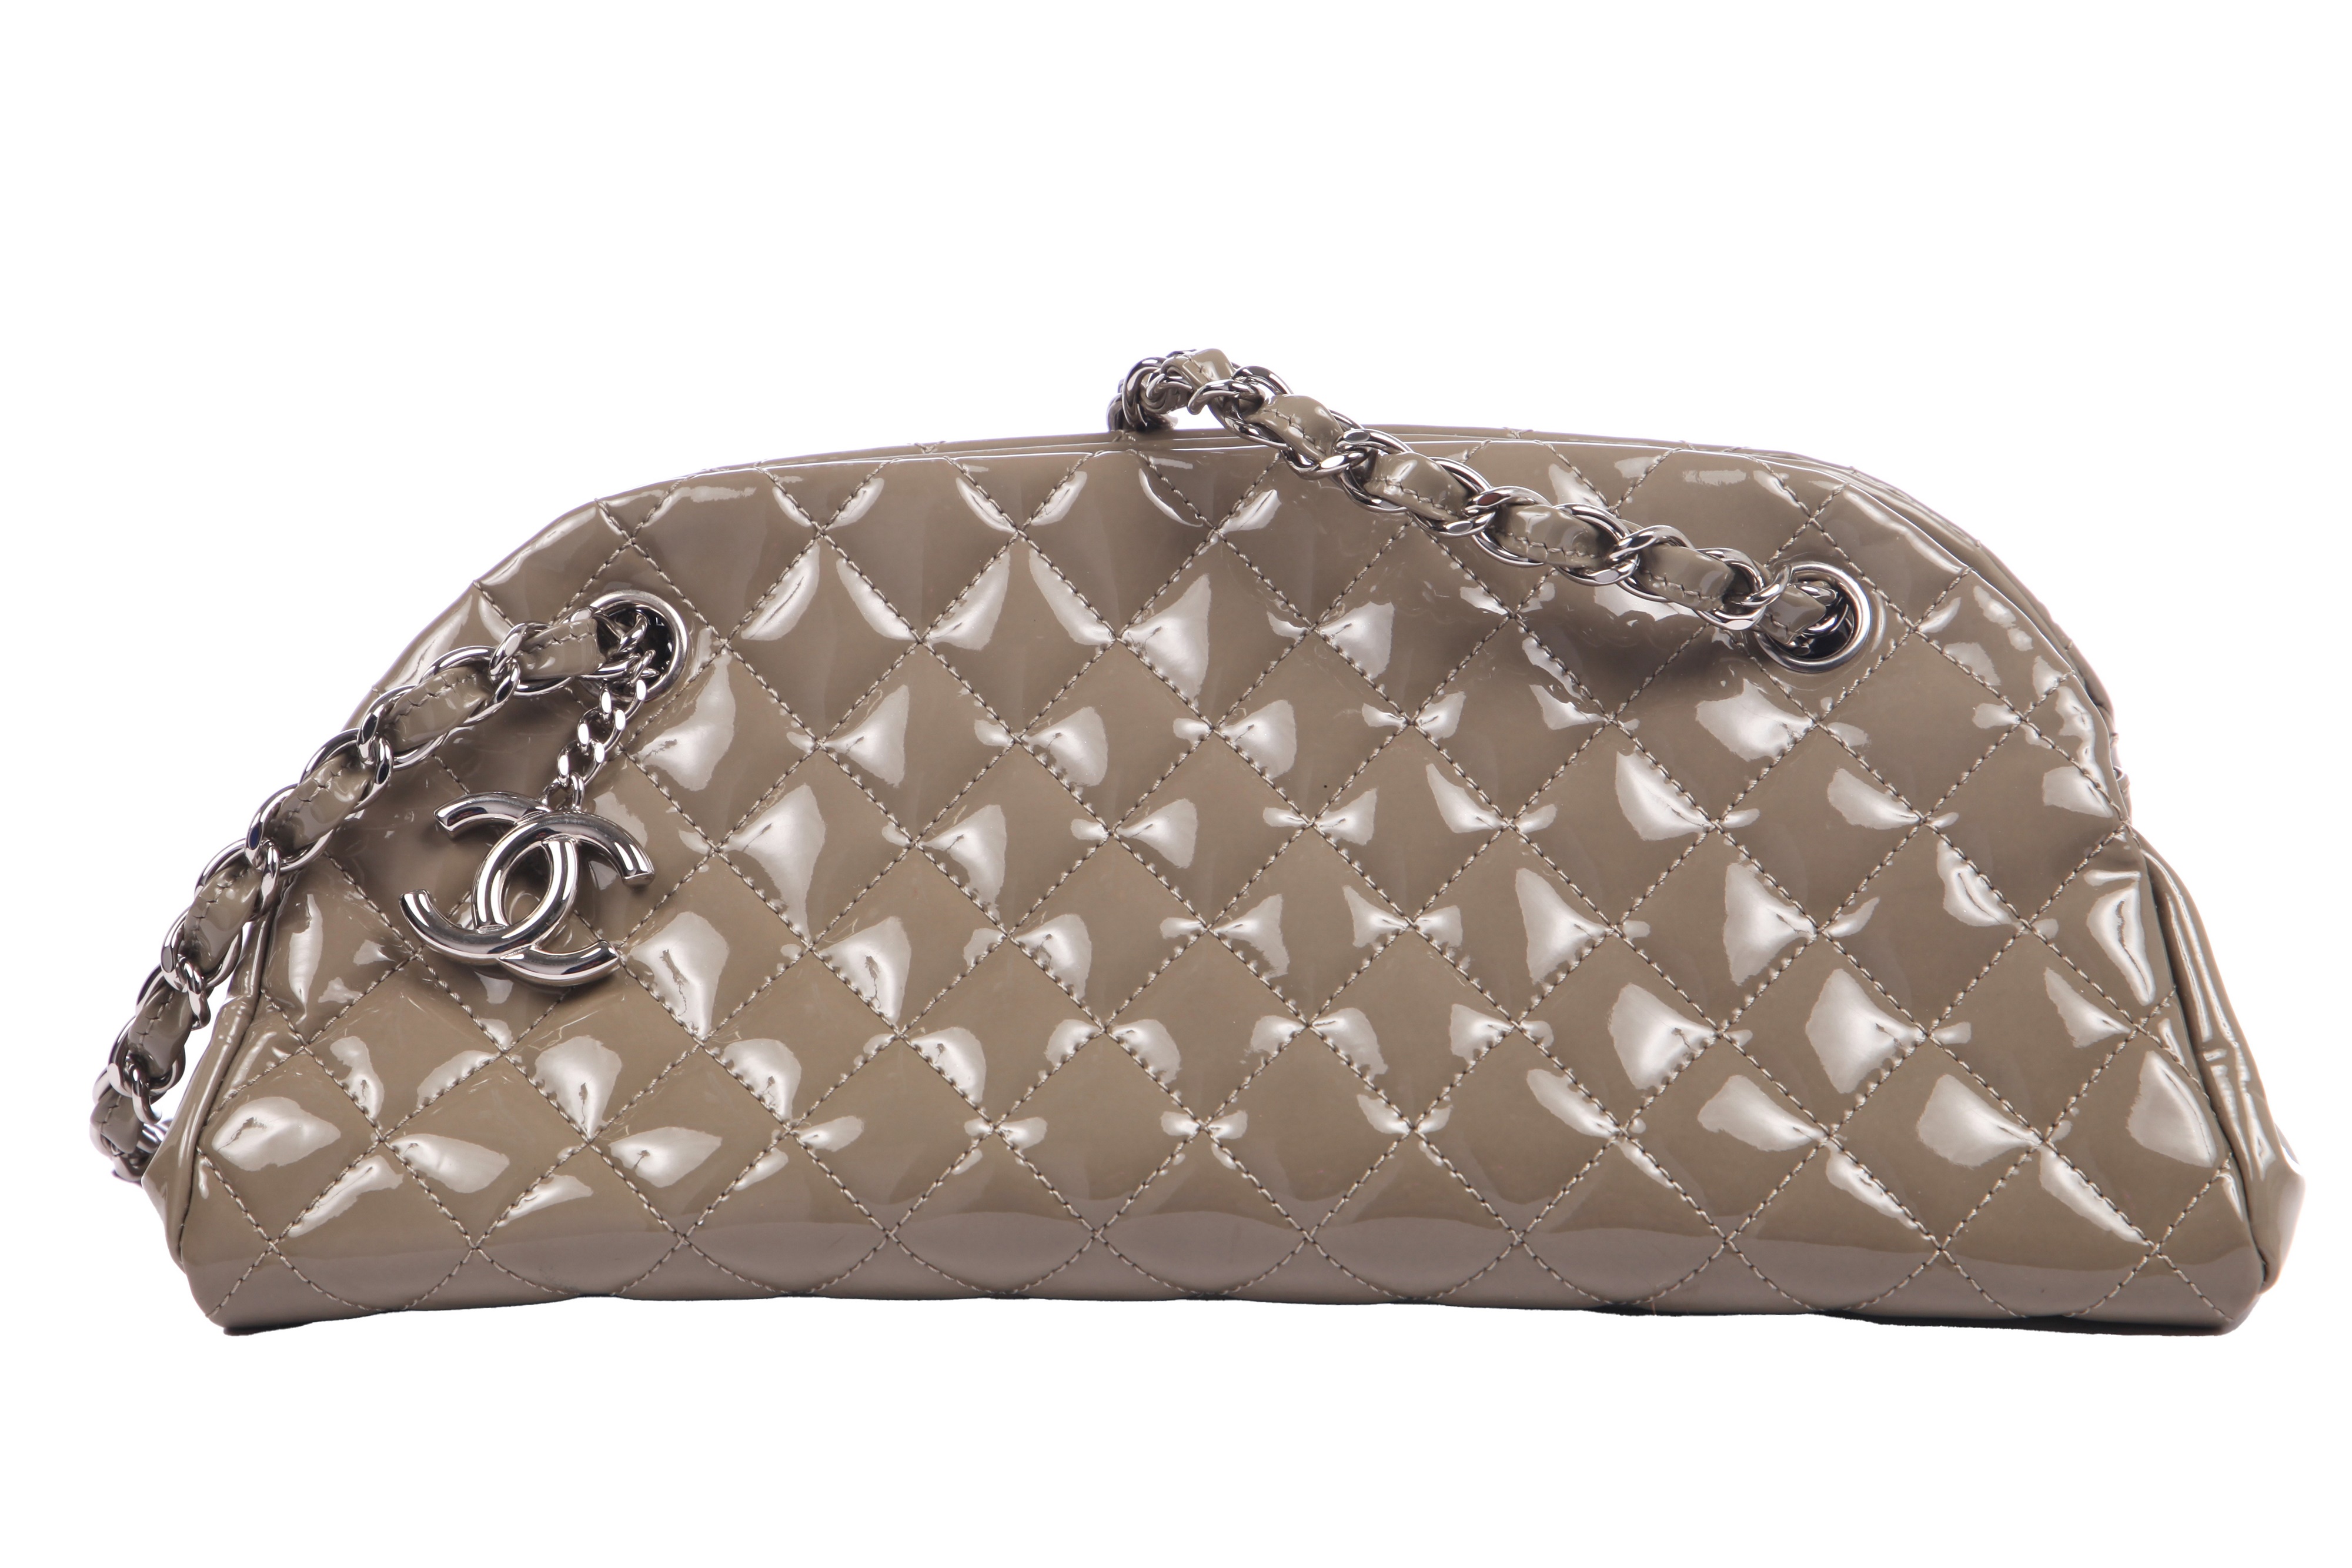 A Chanel quilted grey patent leather bowling bag, 2012